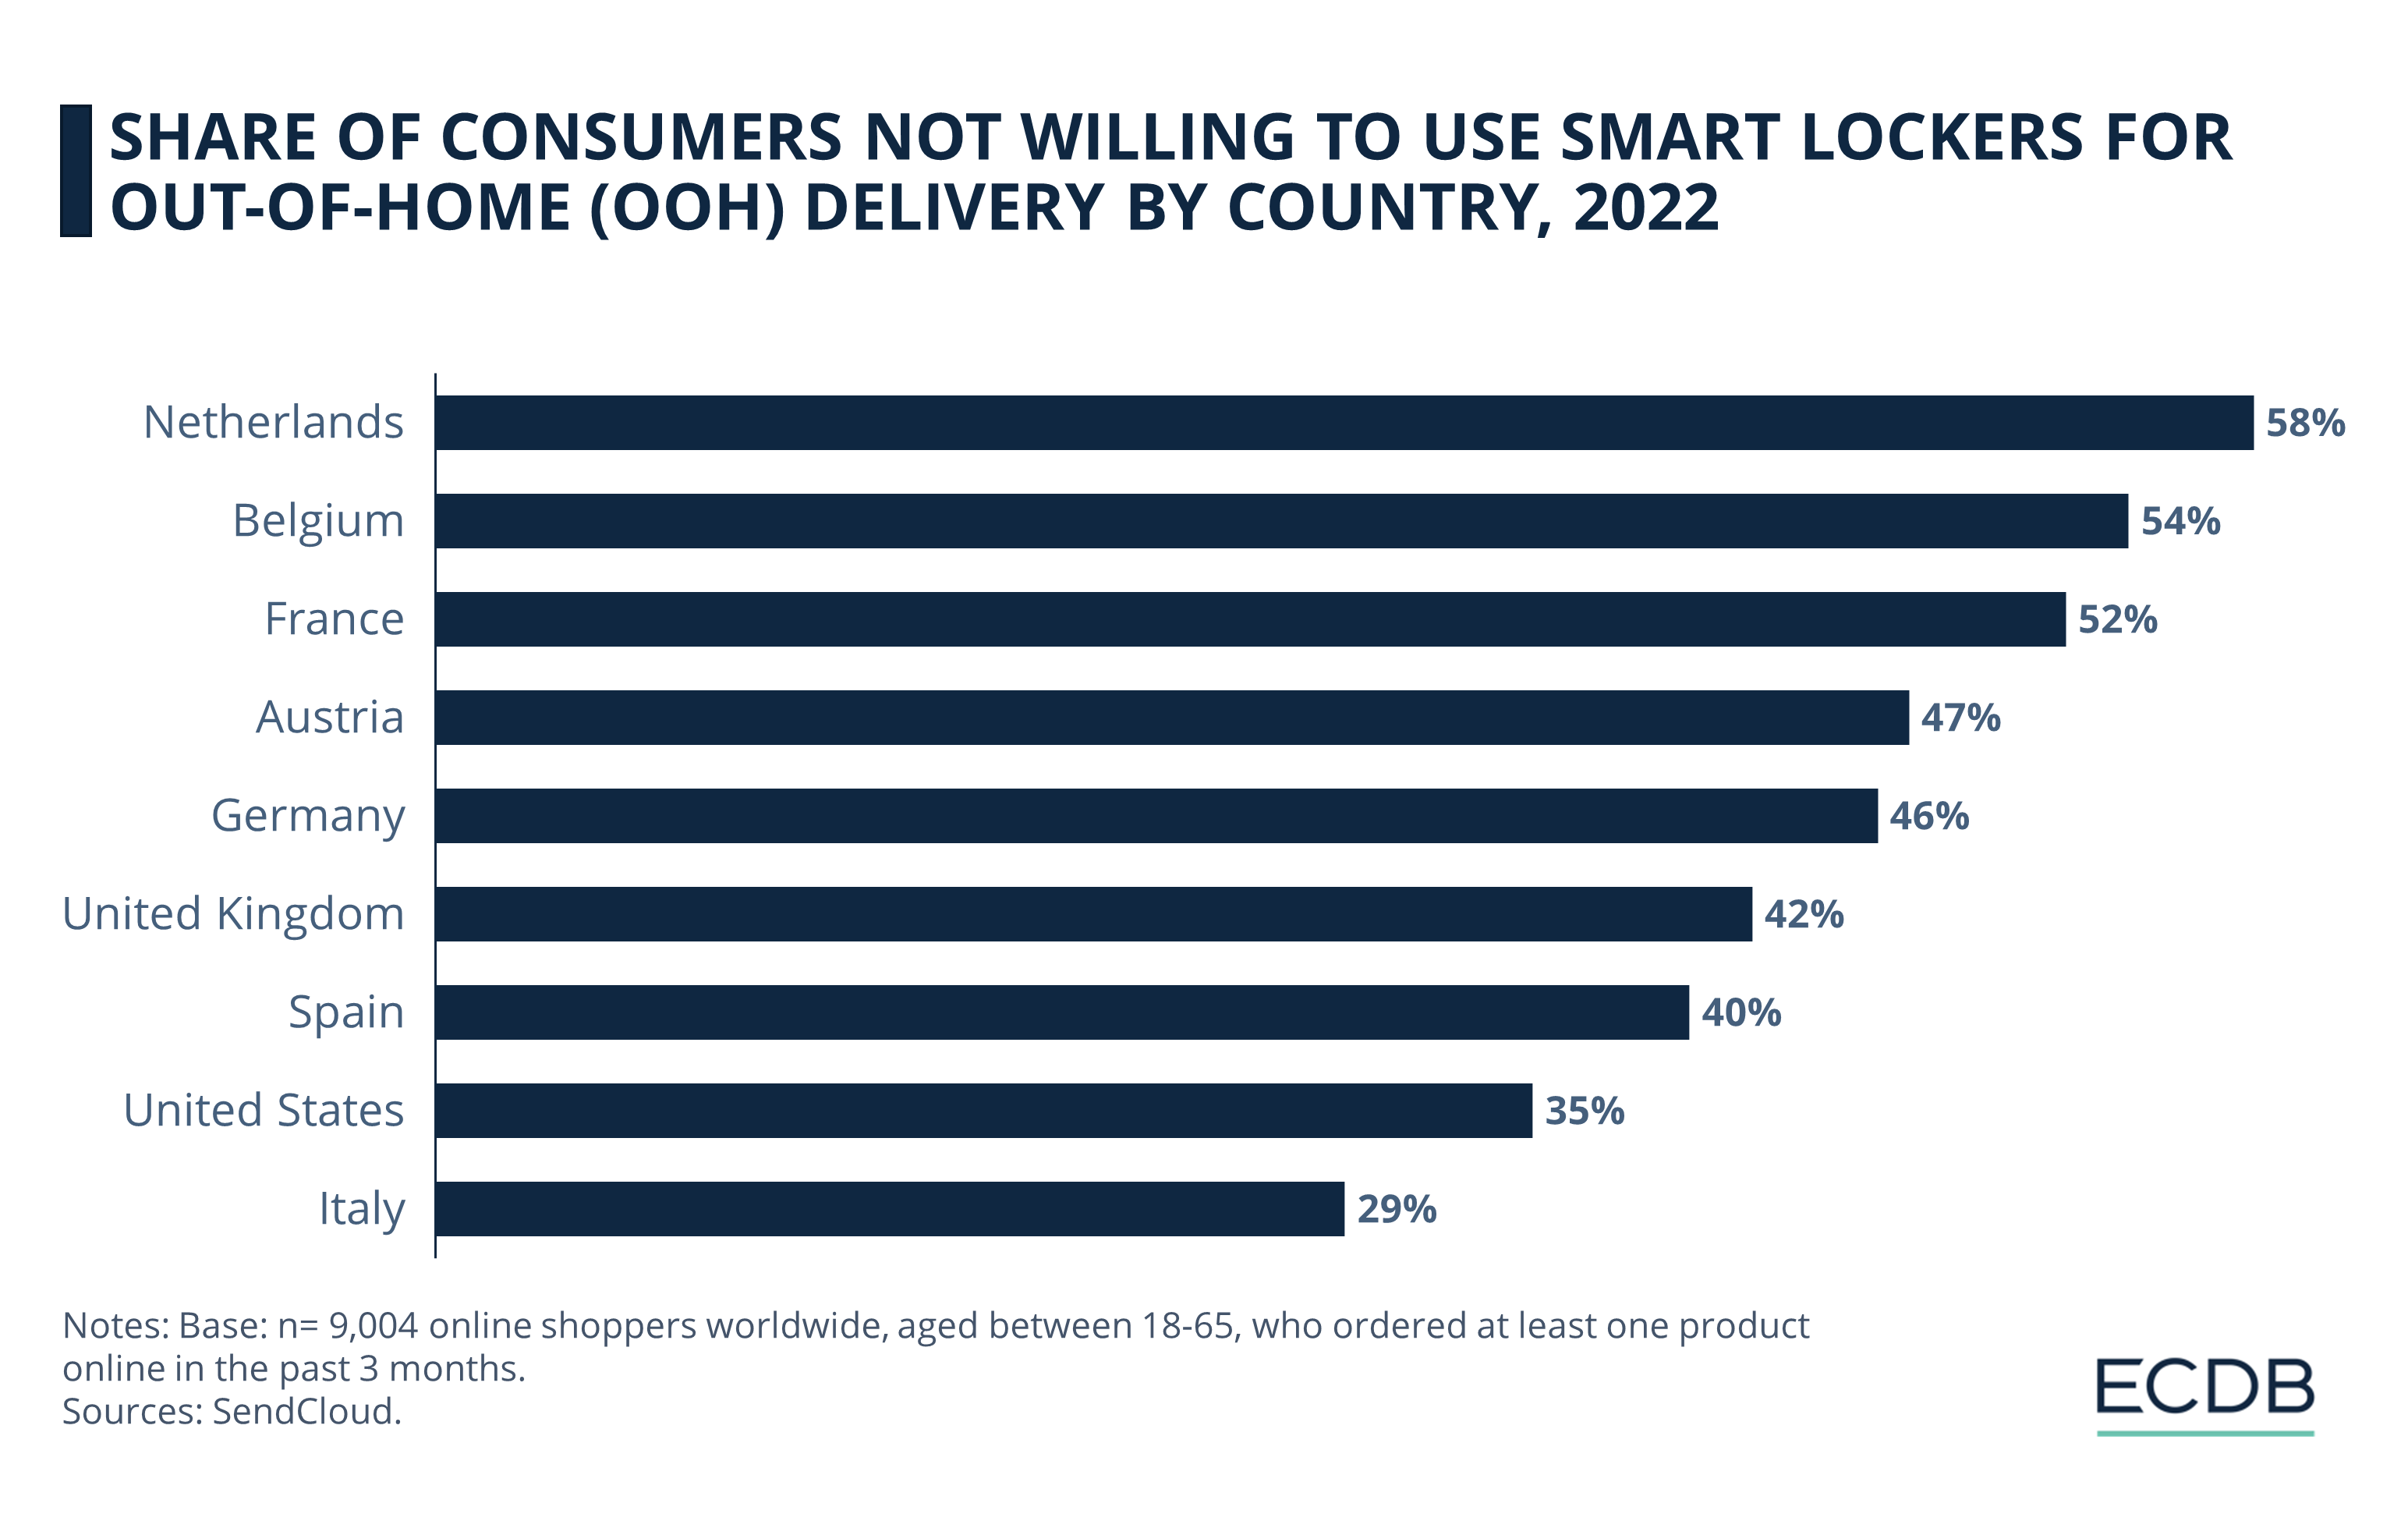 Share of Consumers Not Willing To Use Smart Lockers for Out-of-Home (OOH) Delivery by Country, 2022